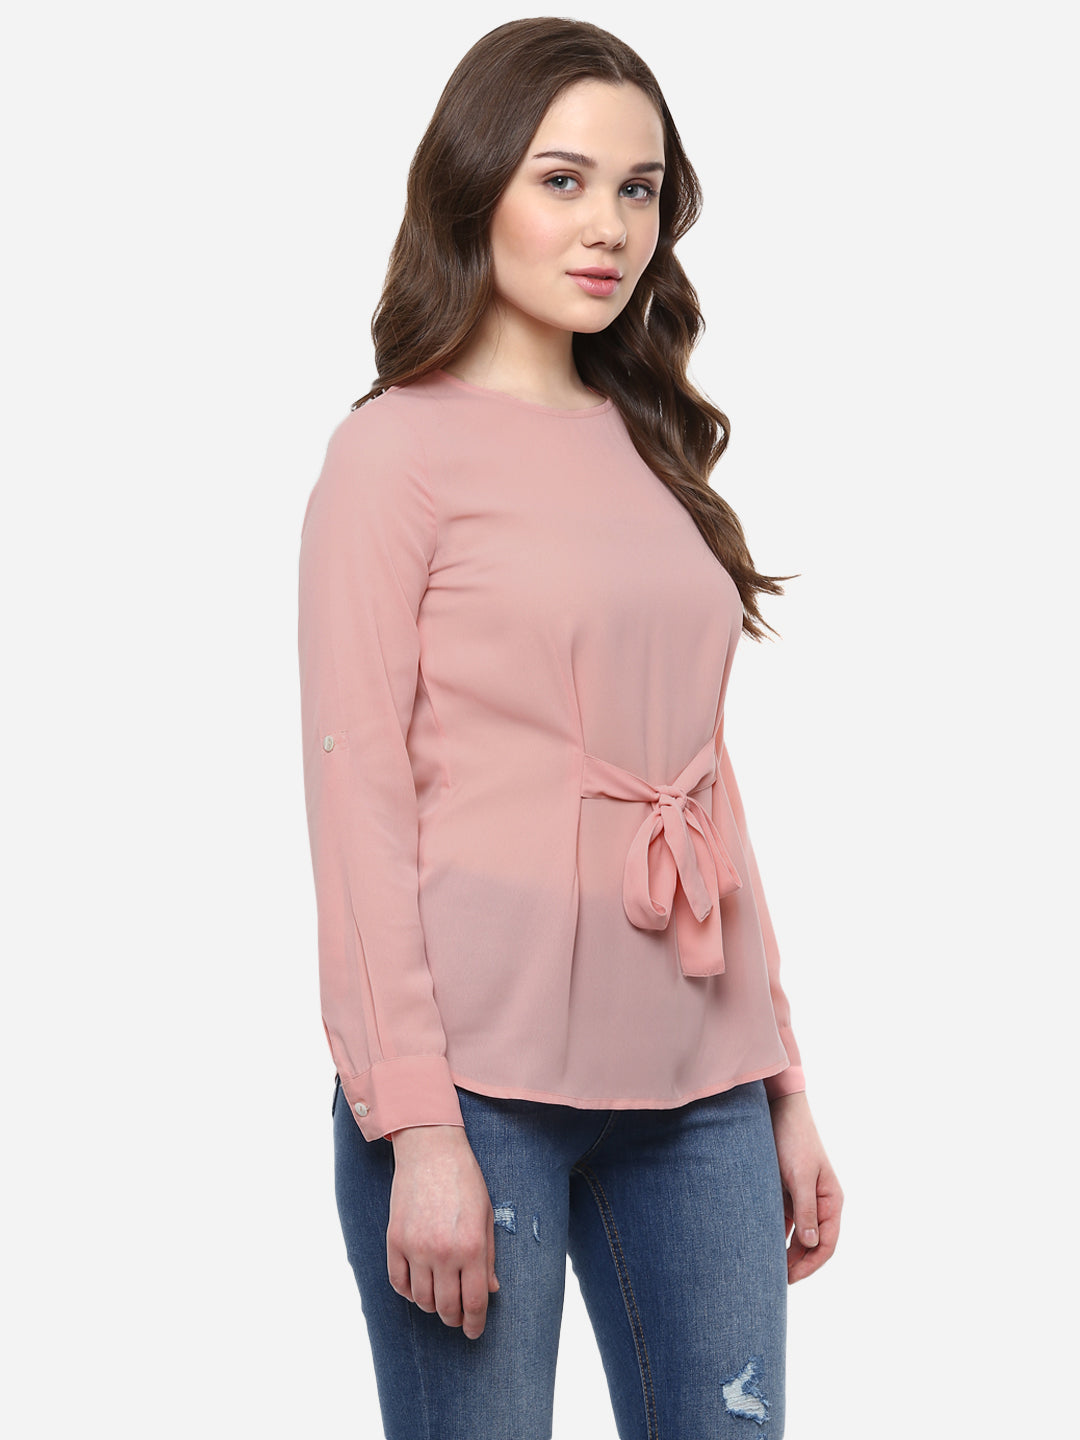 Women's Pink  Georgette Front Knot Top